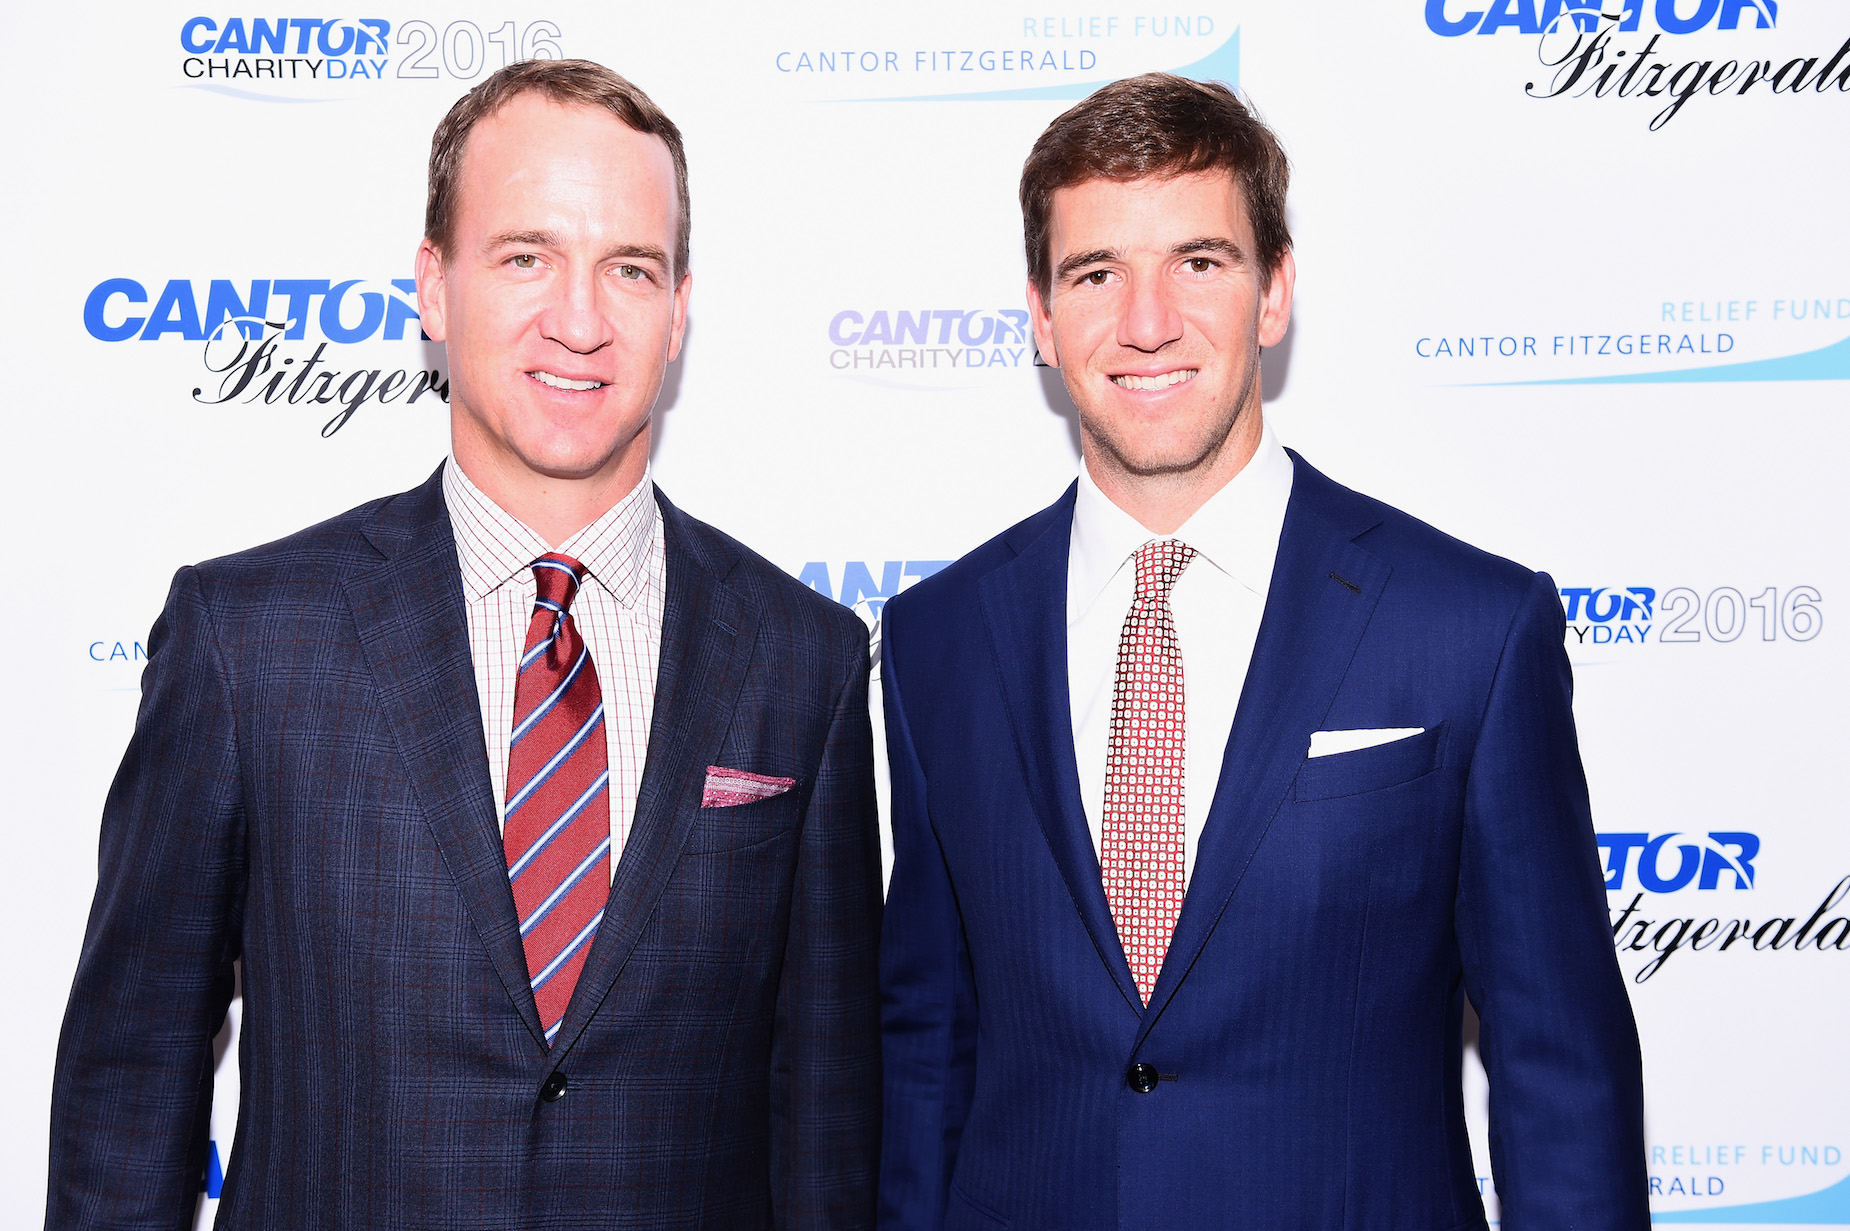 What is Eli Manning's net worth and how does it compare to Peyton Manning's?